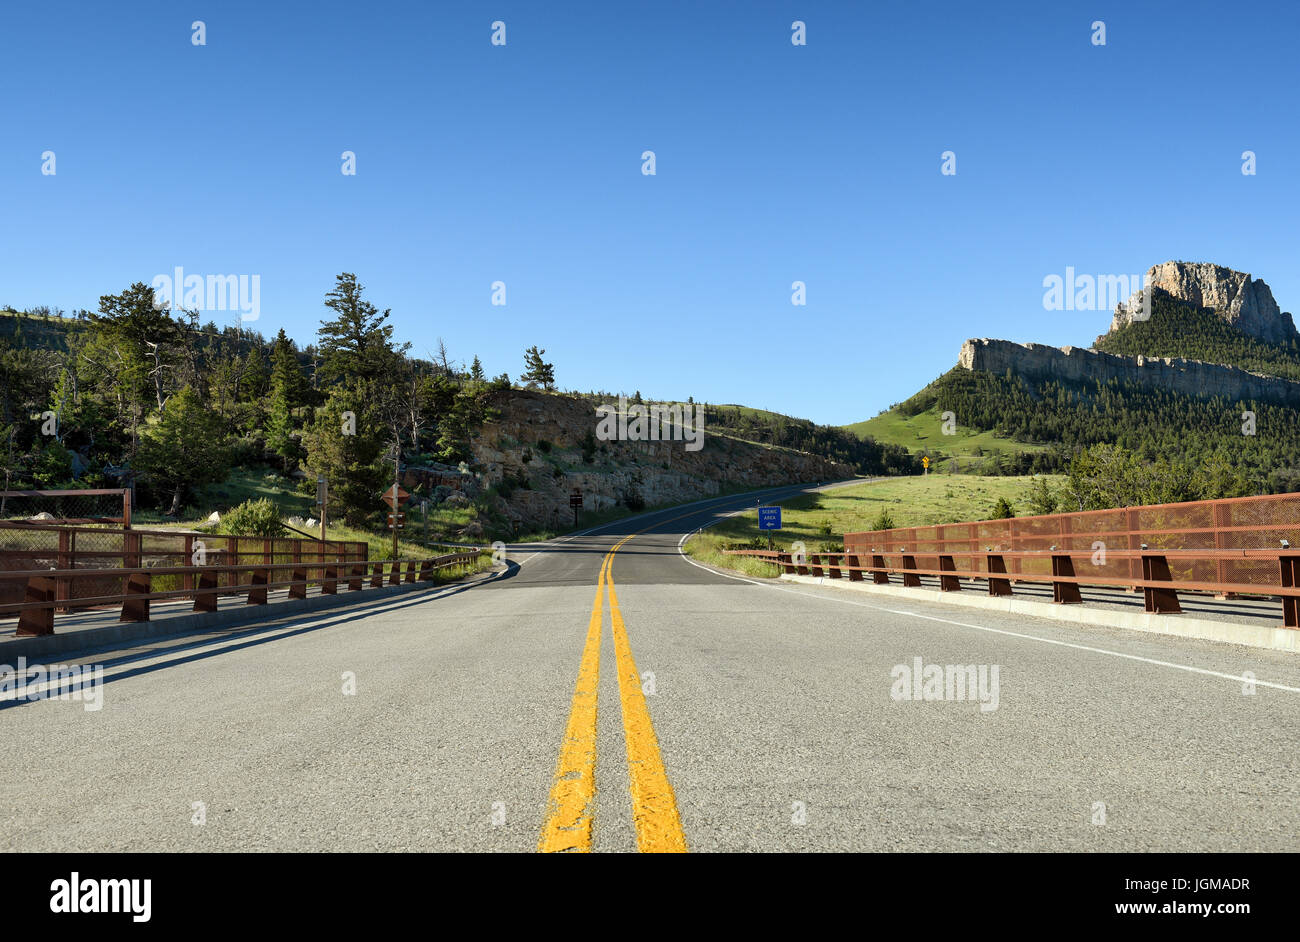 View from the Sunlight Bridge on the Chief Joseph Scenic Byway. The highest bridge in Wyoming spans the Sunlight Creek. Stock Photo